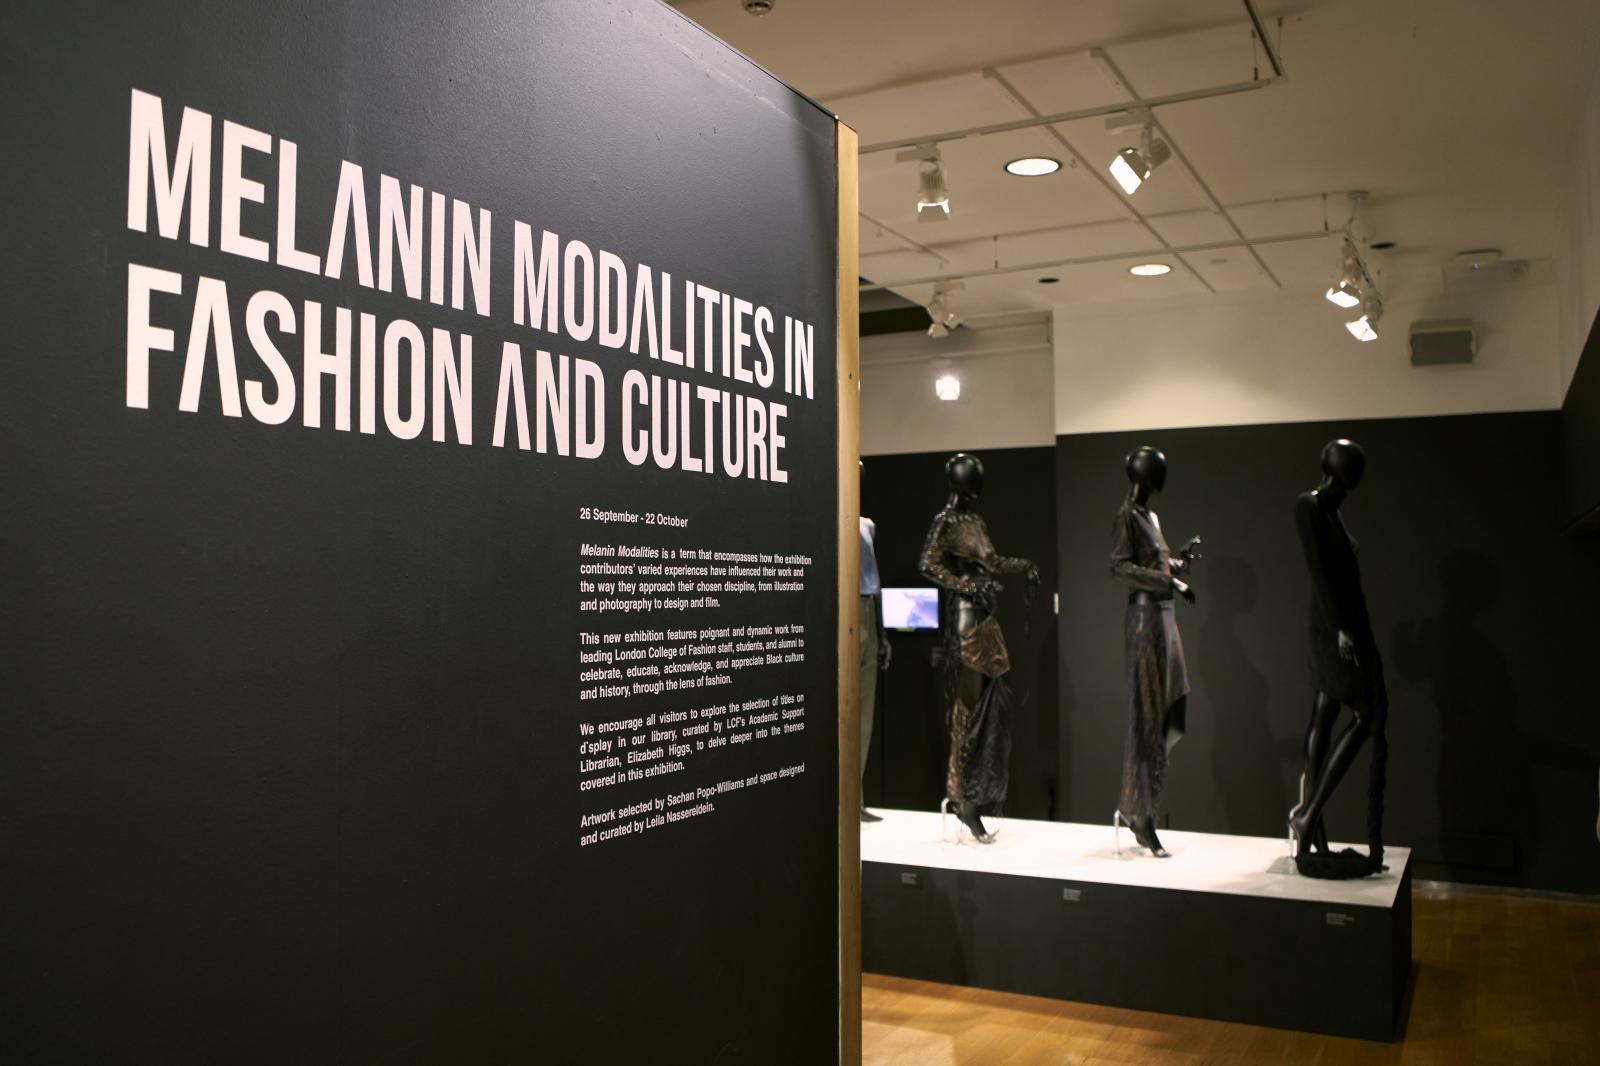 LCF Melanin Modalties in Fashion and Culture Exhibition